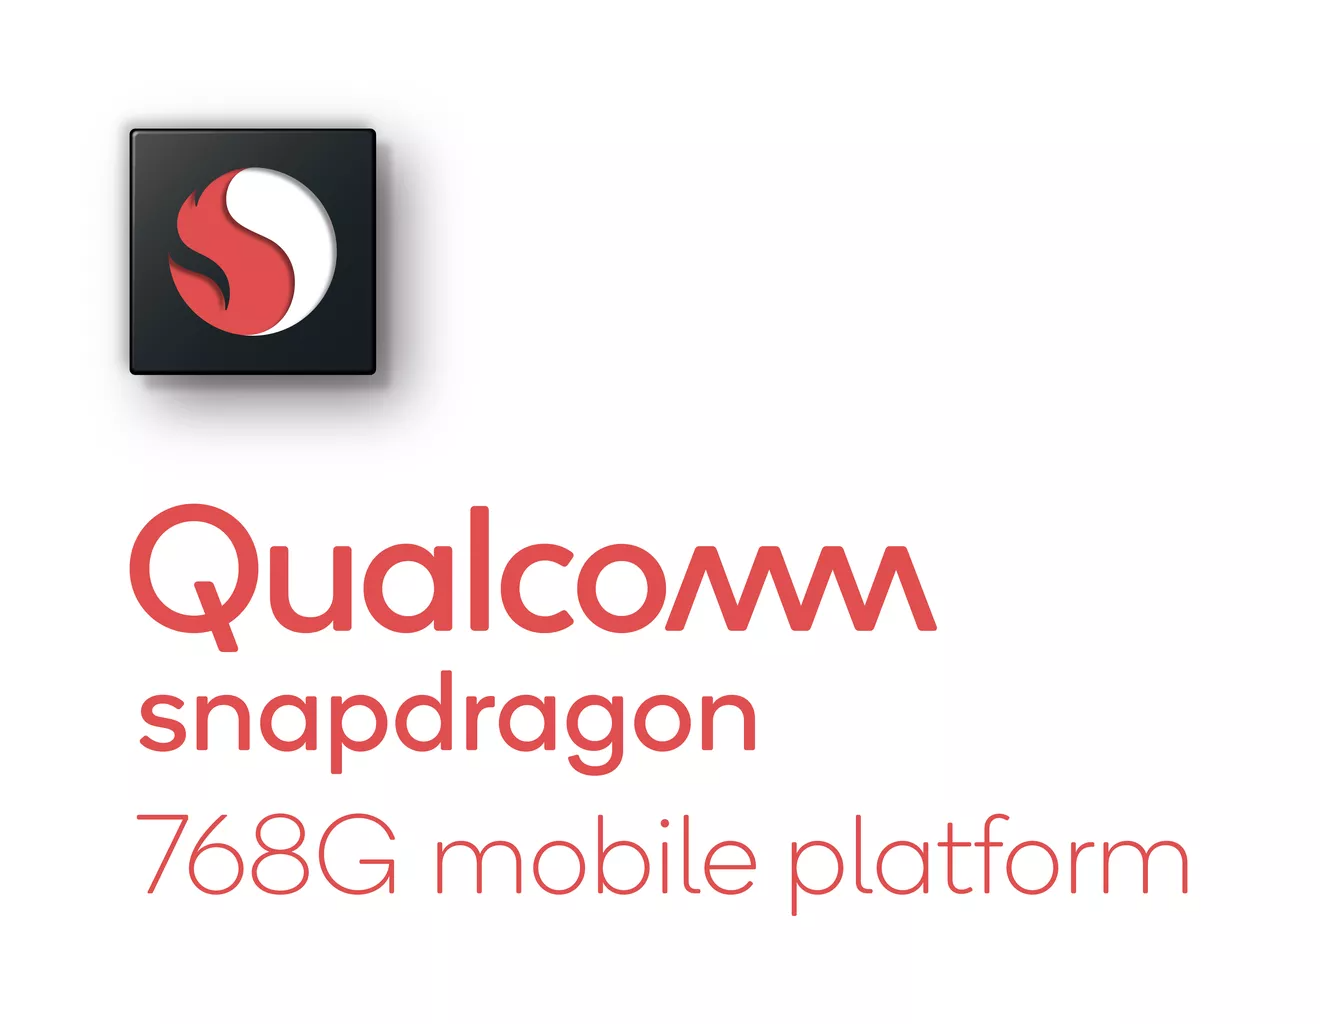 The new Snapdragon 768G may end up in the Google Pixel 5 - The Google Pixel 5 midrange 5G chipset may be Qualcomm's new Snapdragon 768G